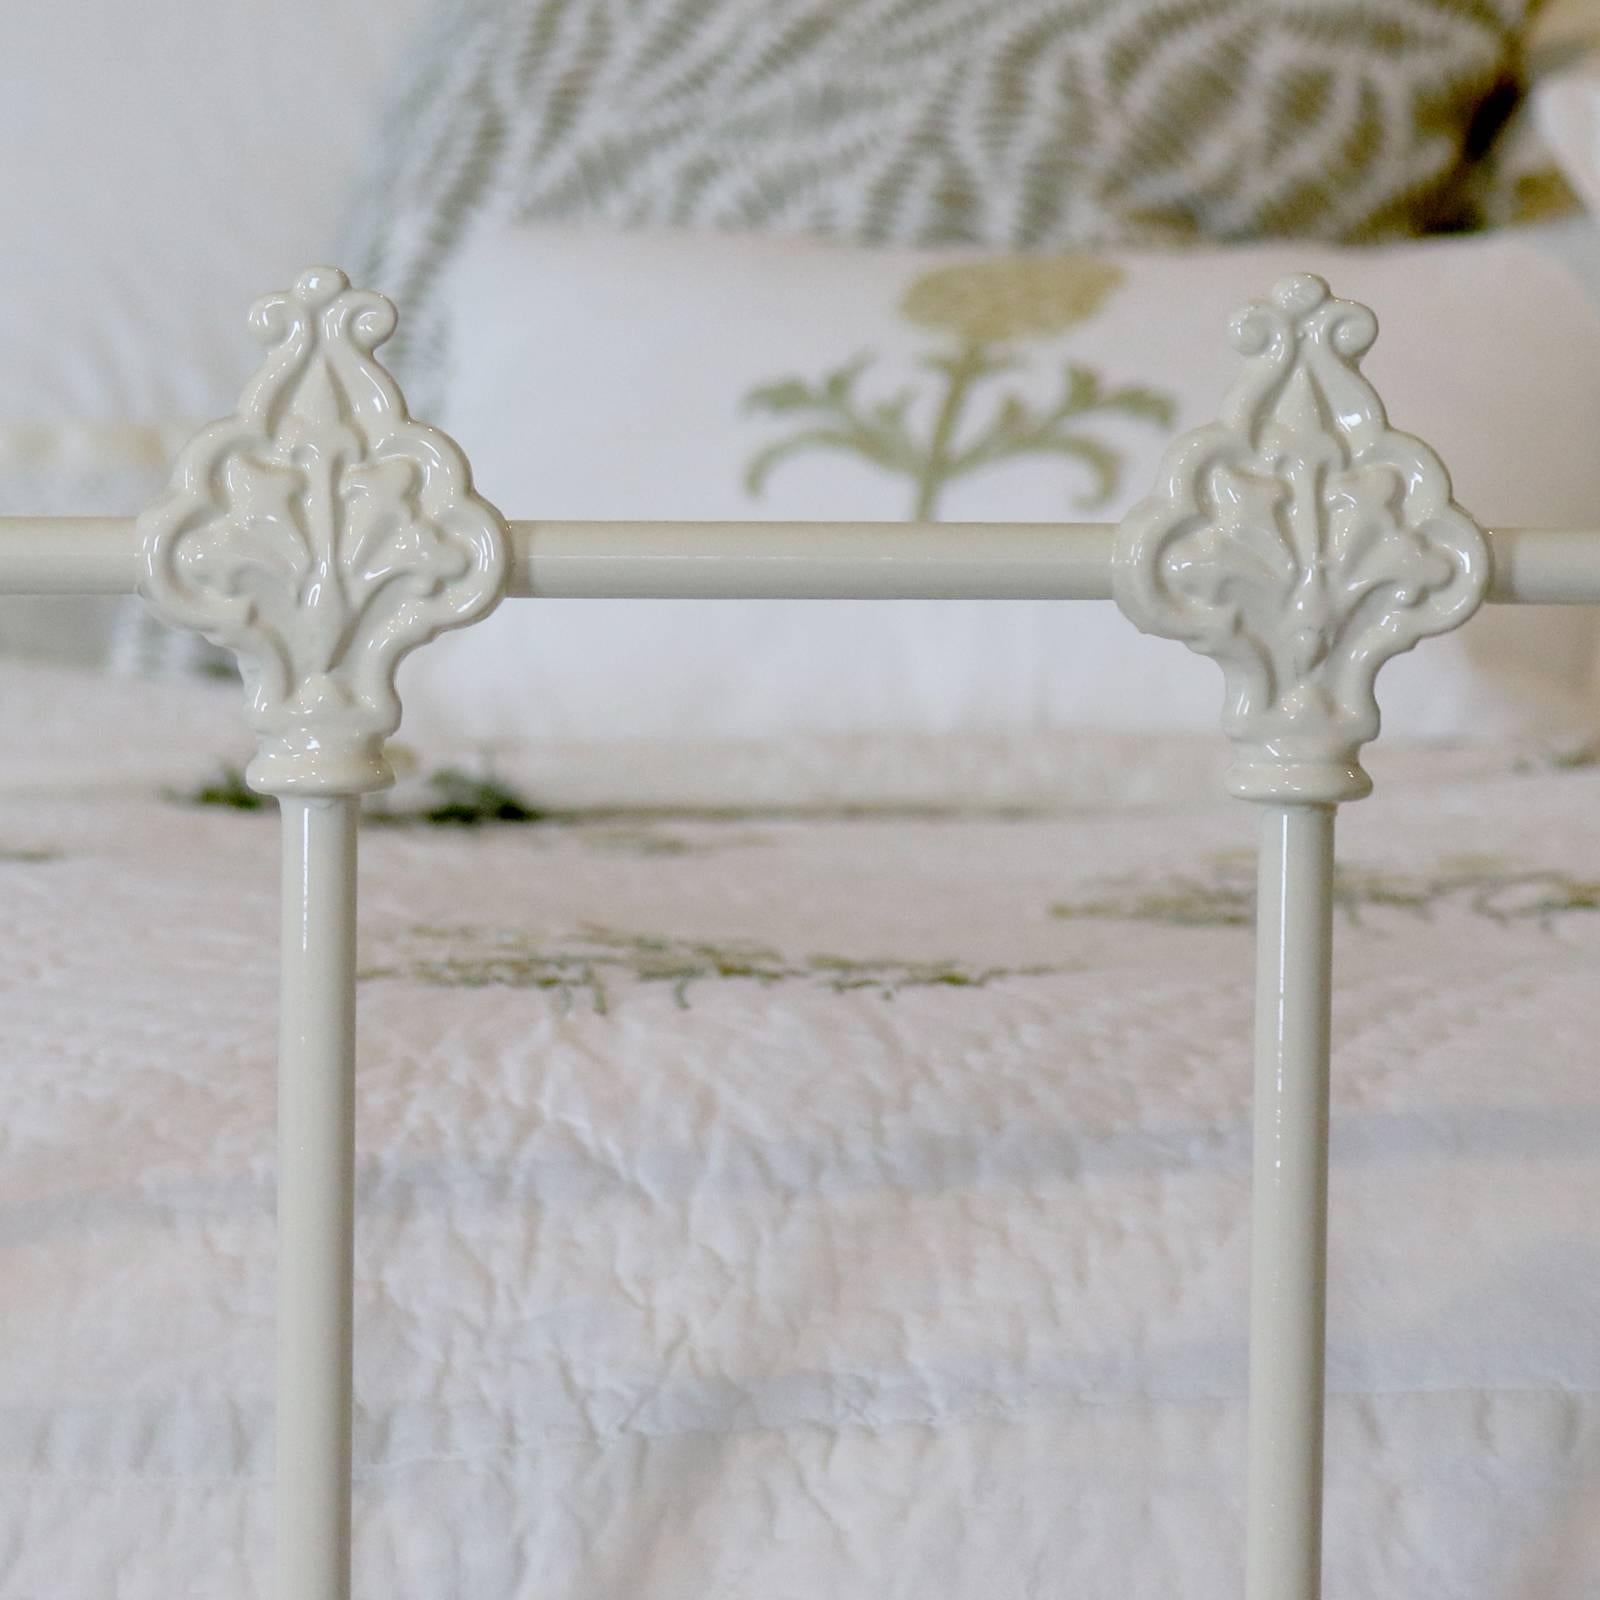 19th Century Wide Brass and Iron Bedstead in Cream